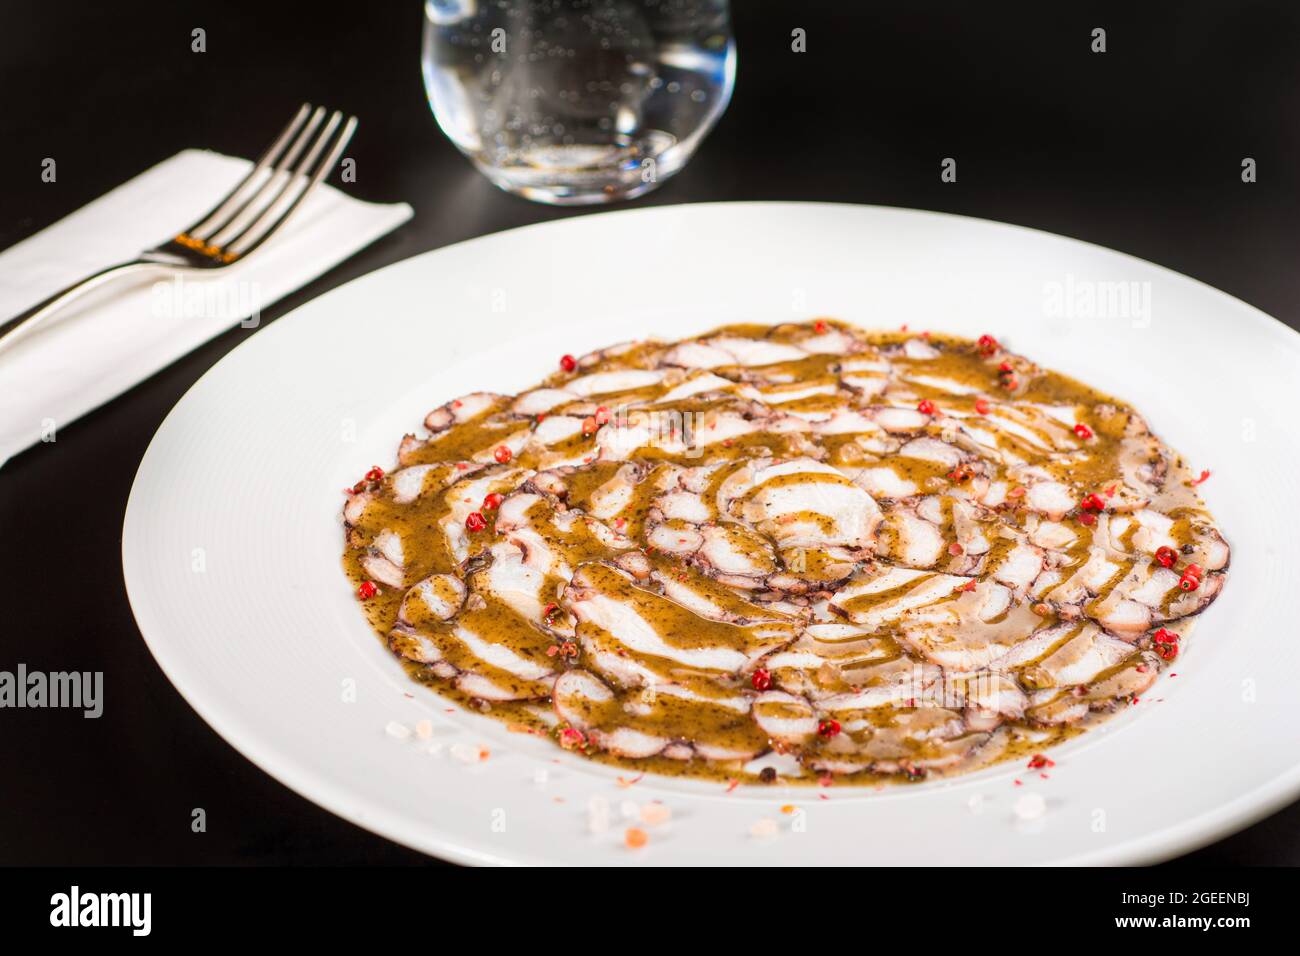 Octopus Carpaccio. Seafood raw octopus slices with olive oil and black pepper on a white plate. Stock Photo